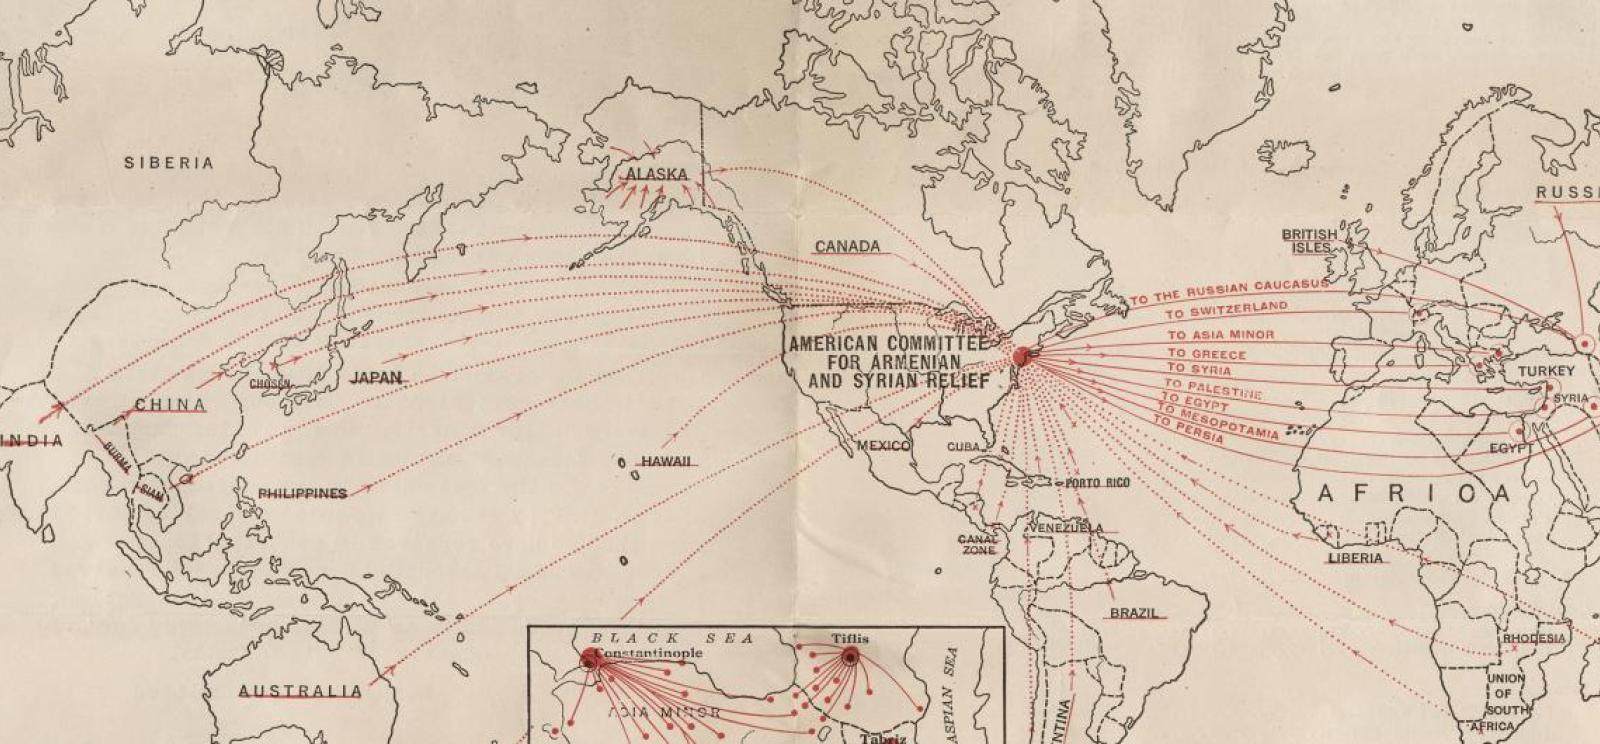 Fragment of a printed map labeled 'American Committee for Armenian and Syrian Relief' with red arrows radiating from the US